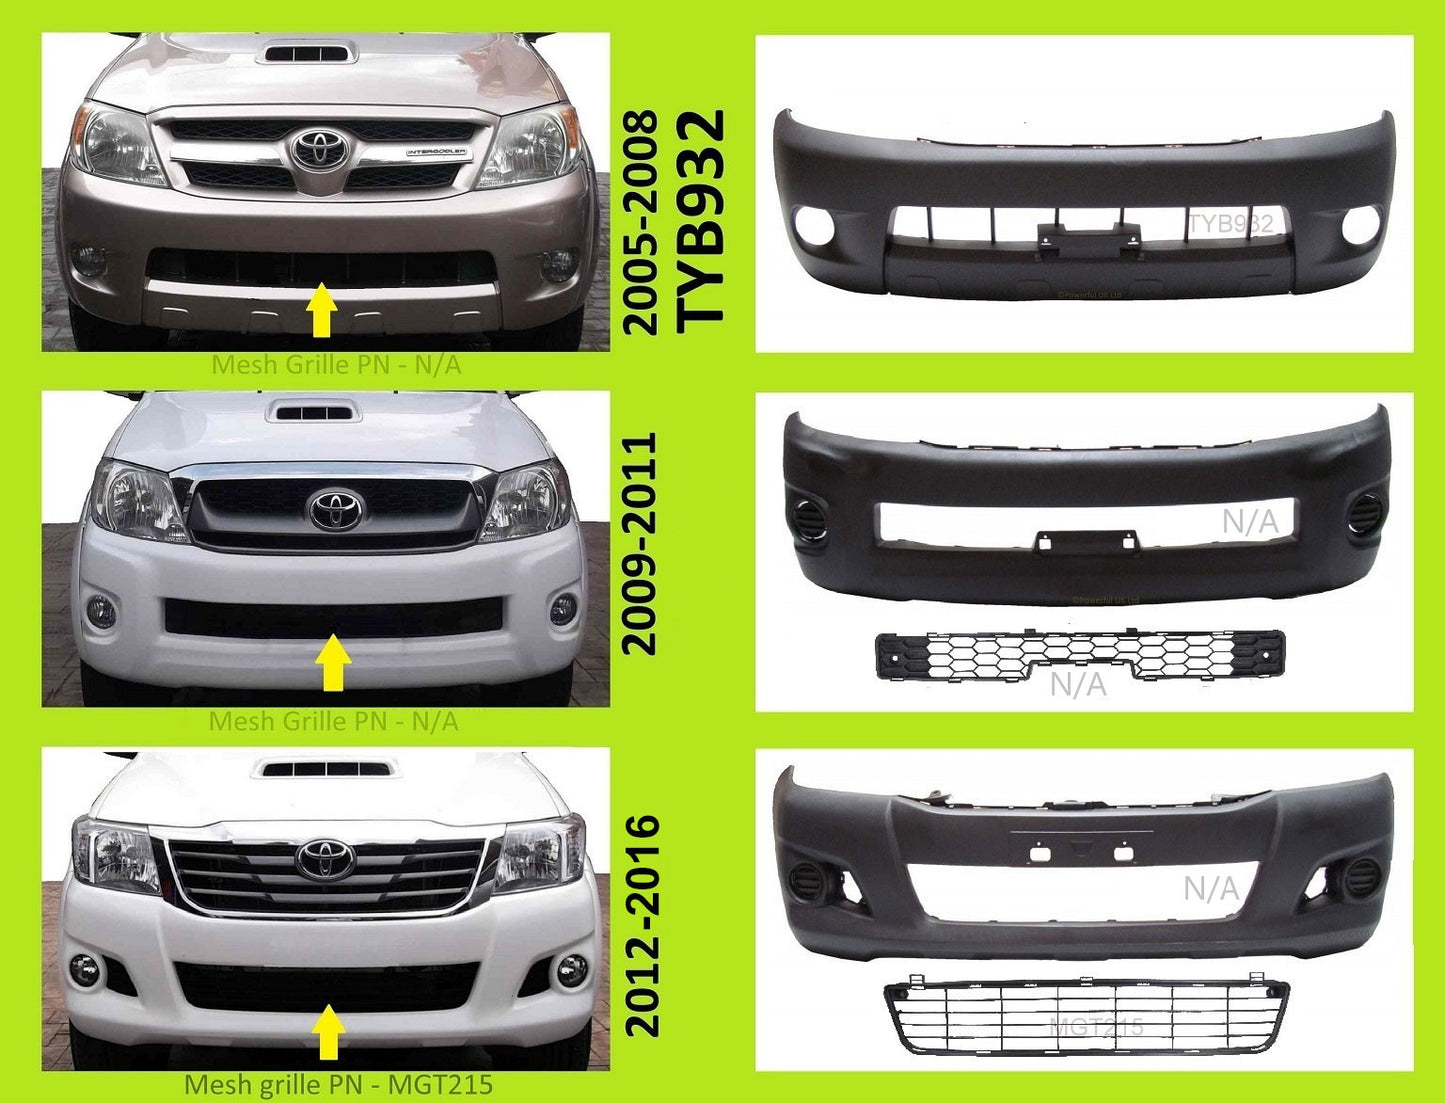 Front Bumper for Toyota Hilux Mk6 (2005-2008)